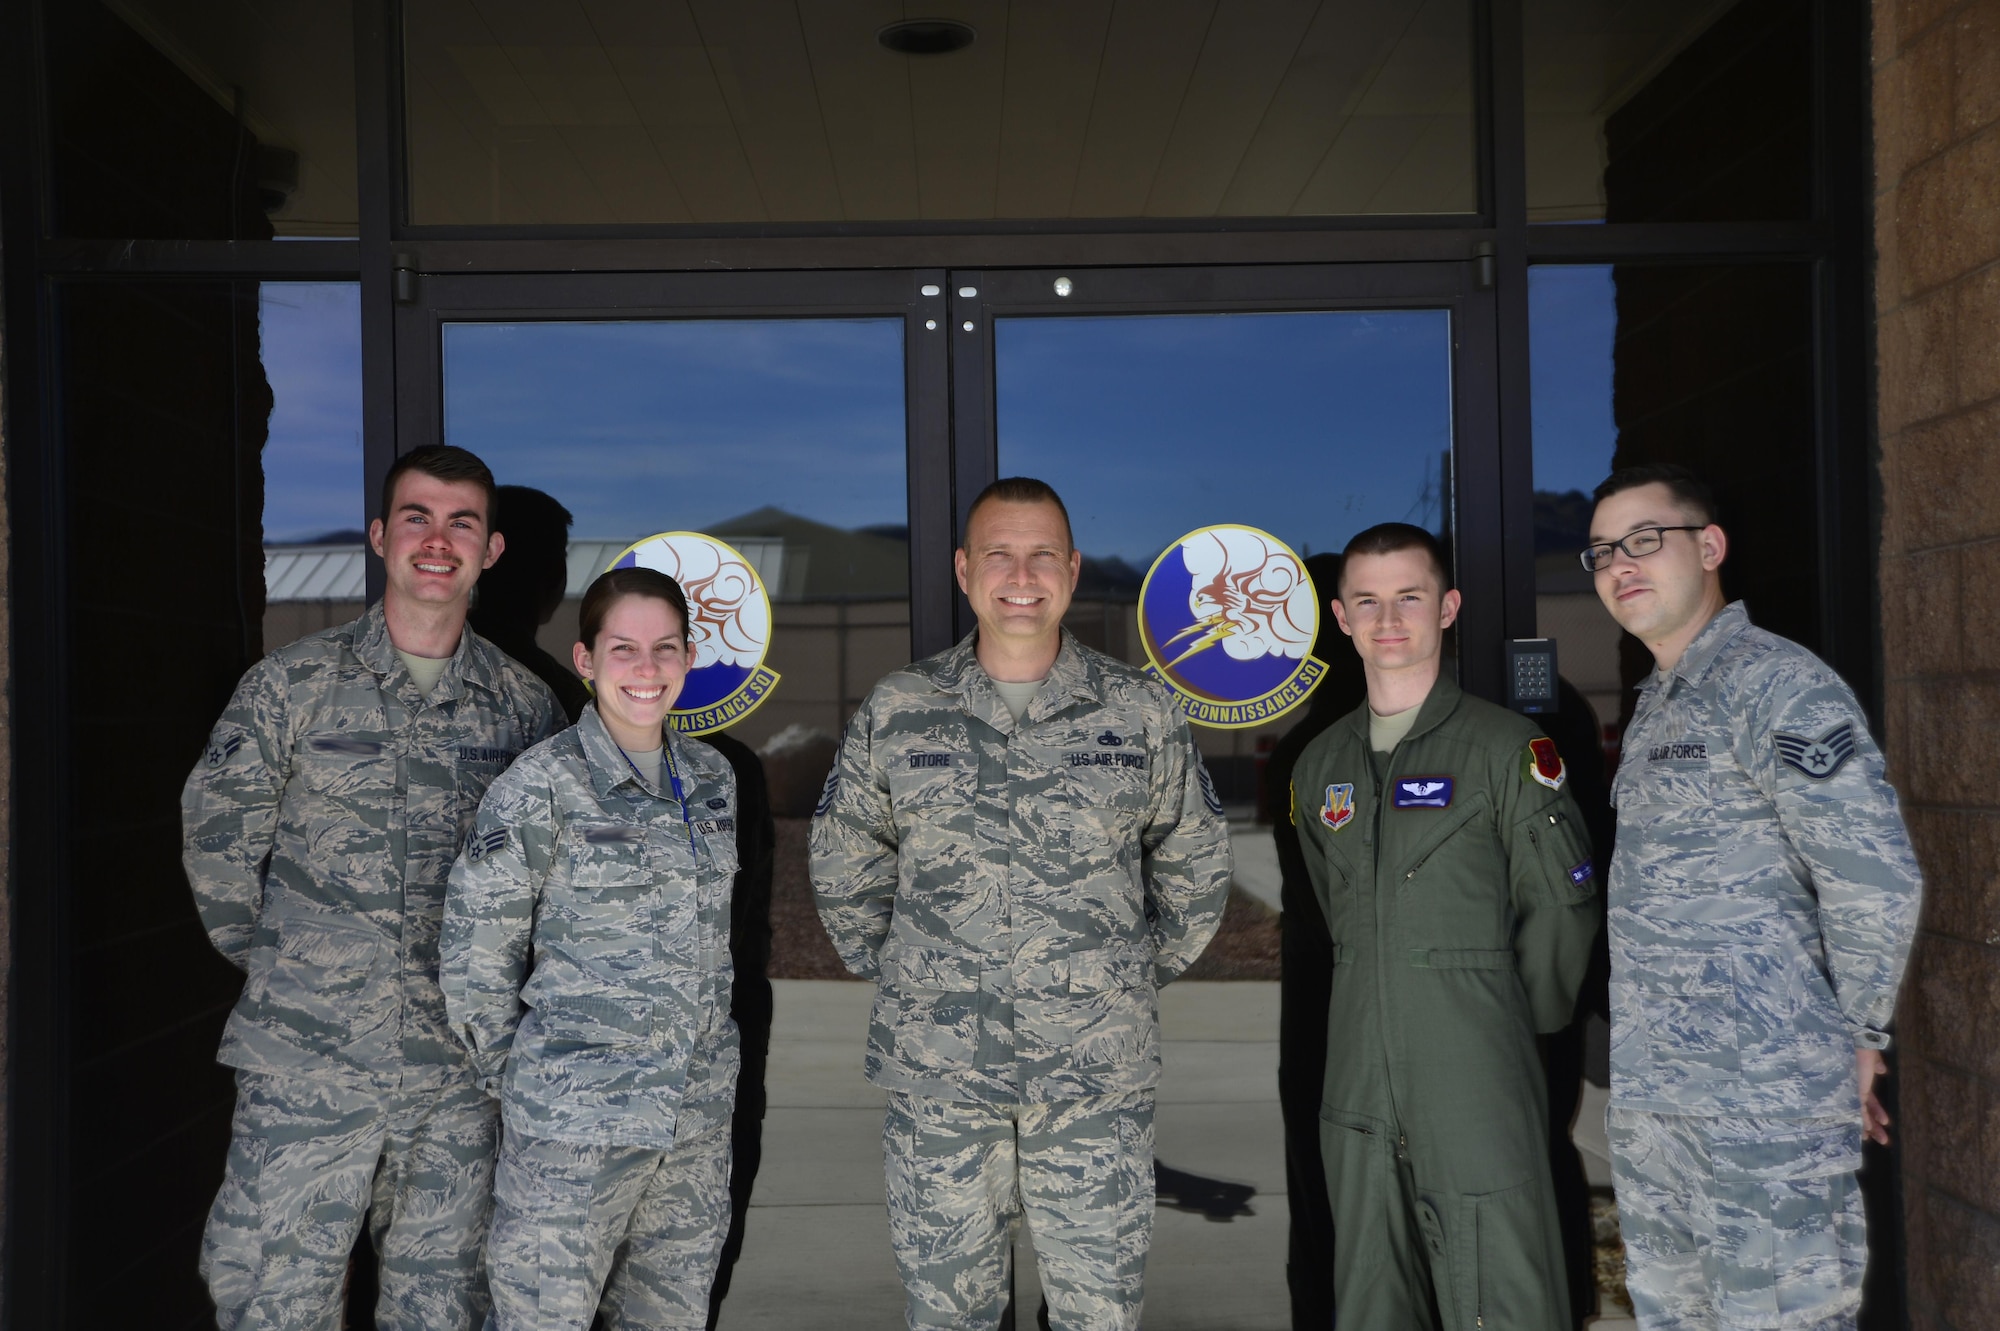 Chief Master Sgt. Michael Ditore, 432nd Wing/432nd Air Expeditionary Wing command chief poses for a photo with Airmen from the 22nd Reconnaissance Squadron March 23, 2016, at Creech Air Force Base, Nevada. The 22nd Reconnaissance Squadron employs Total Force MQ-1/B Predator and MQ-9 Reaper aircrew, and supporting Overseas Contingency Operations worldwide. (U.S. Air Force photo by Senior Airman Christian Clausen/Released)